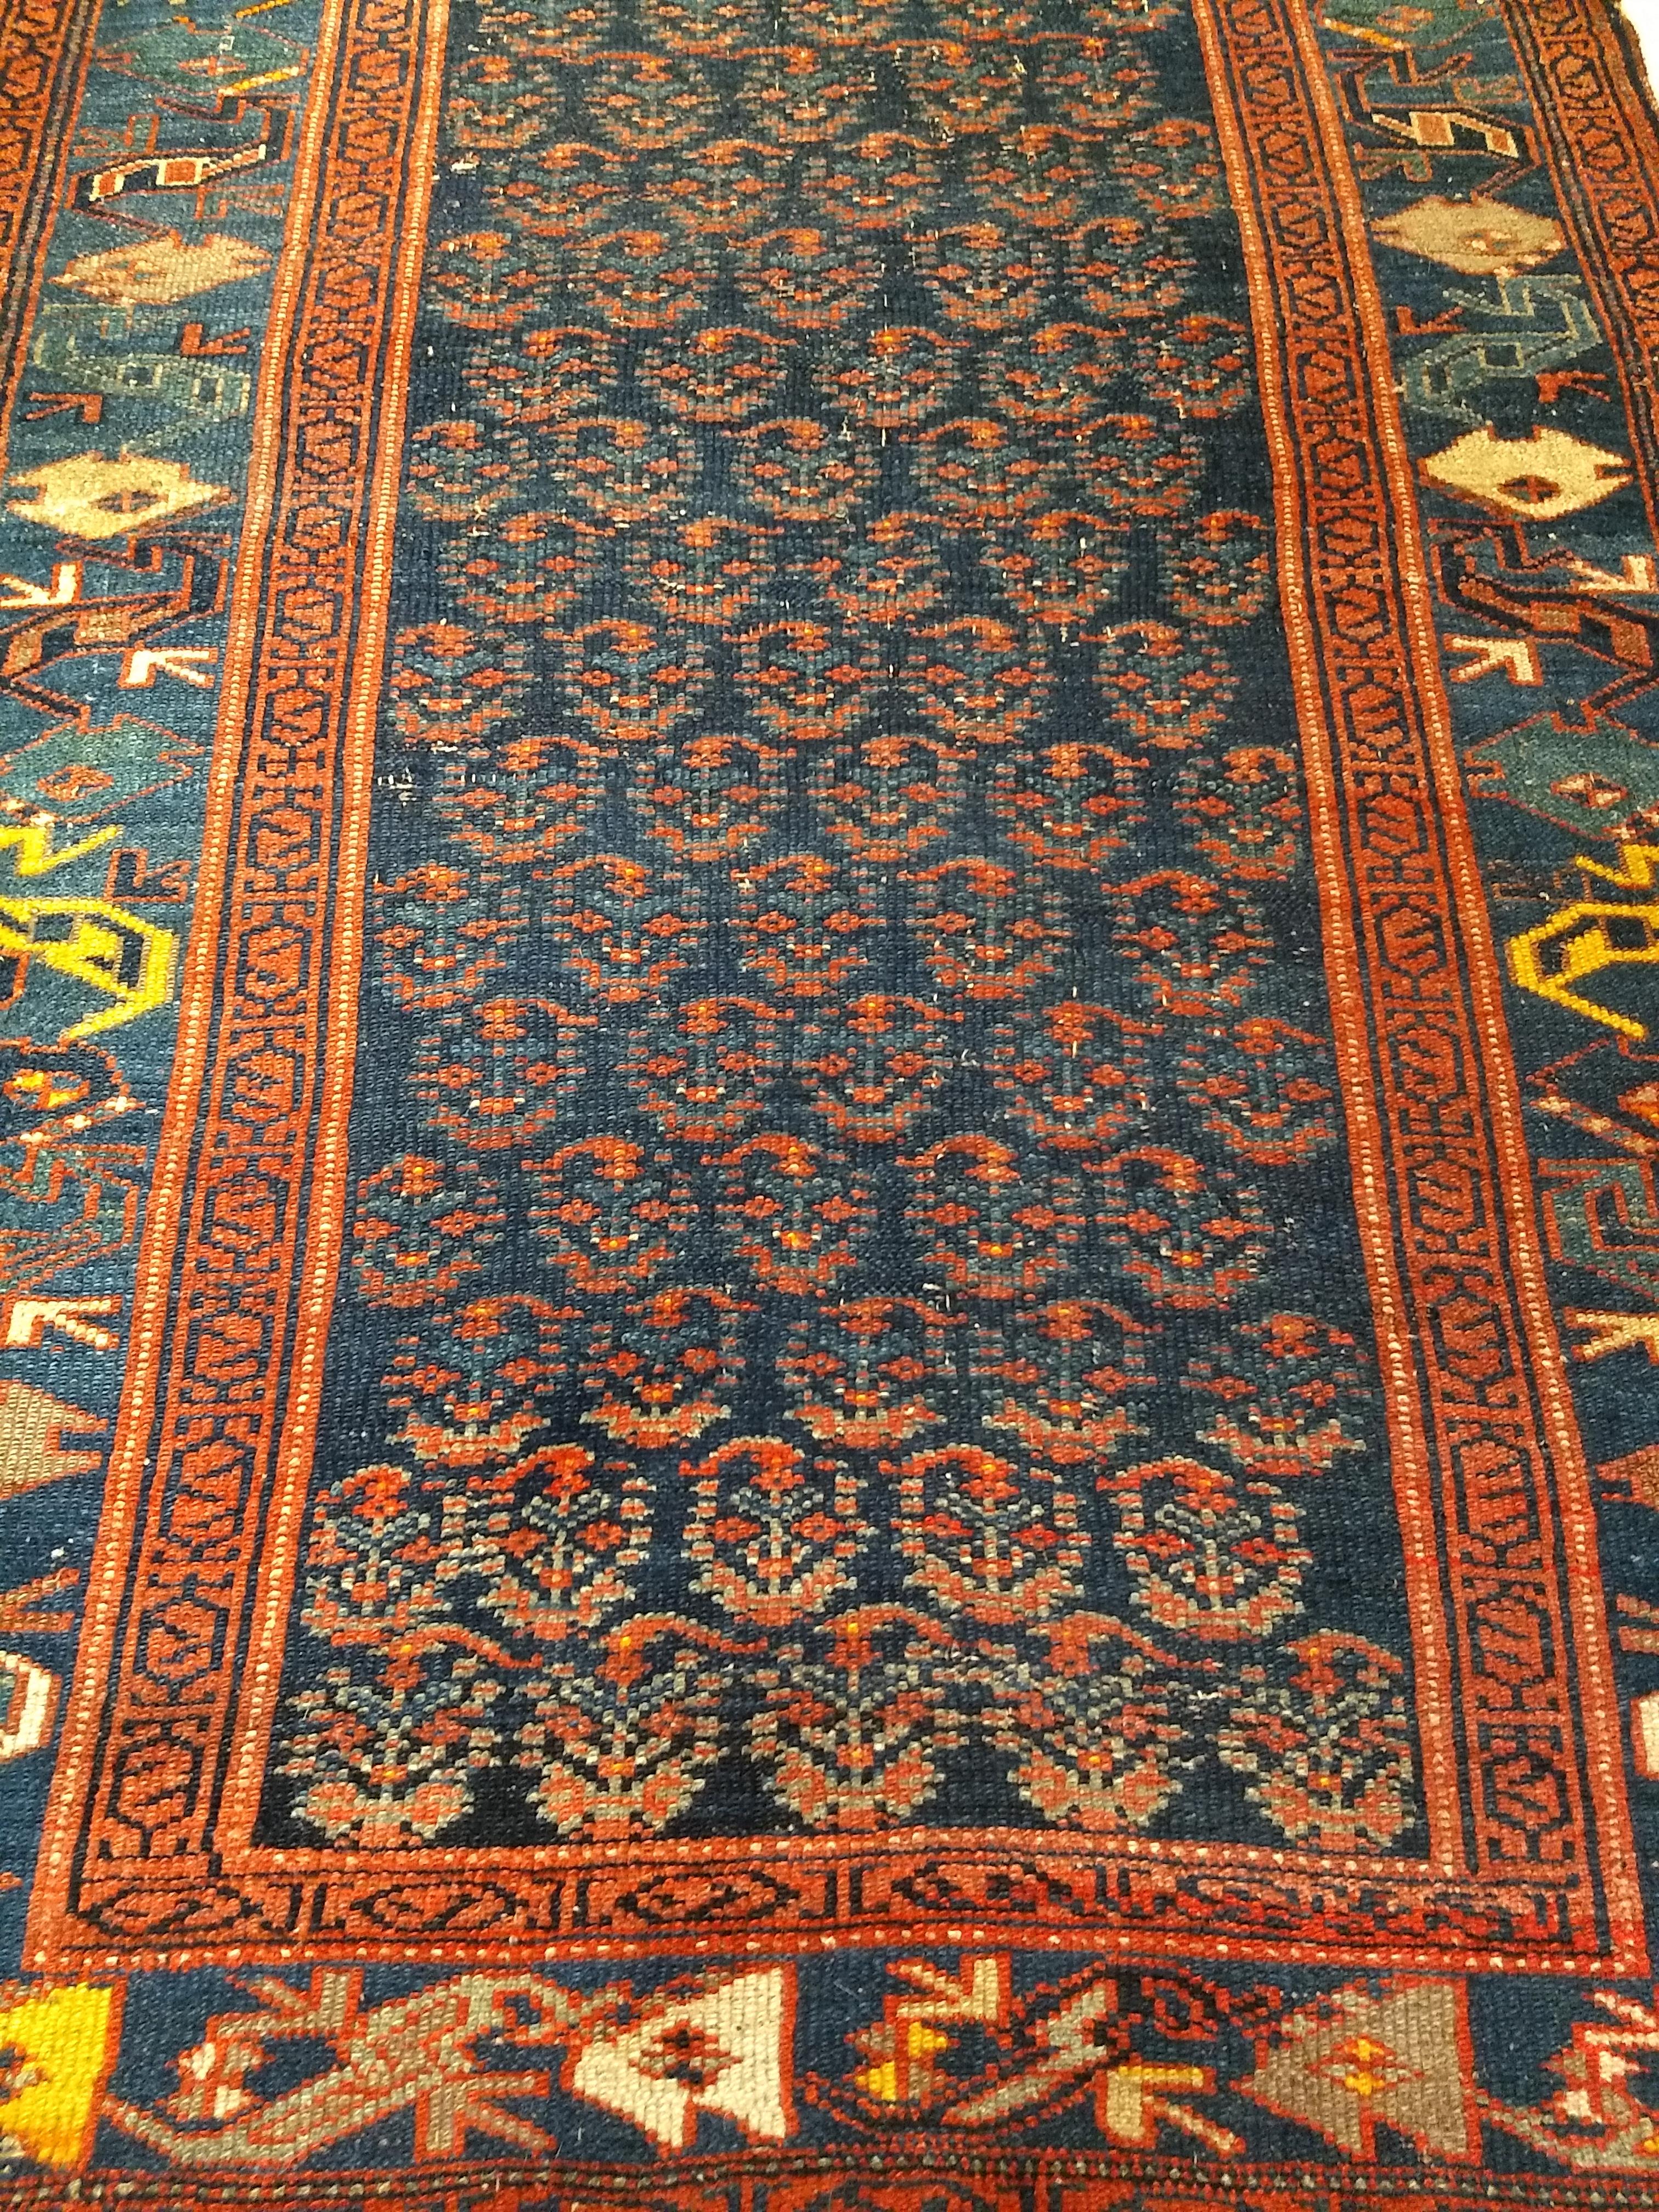 Vintage Persian Bidjar Area Rug in Allover Paisley in Navy Blue, Green, Yellow For Sale 3